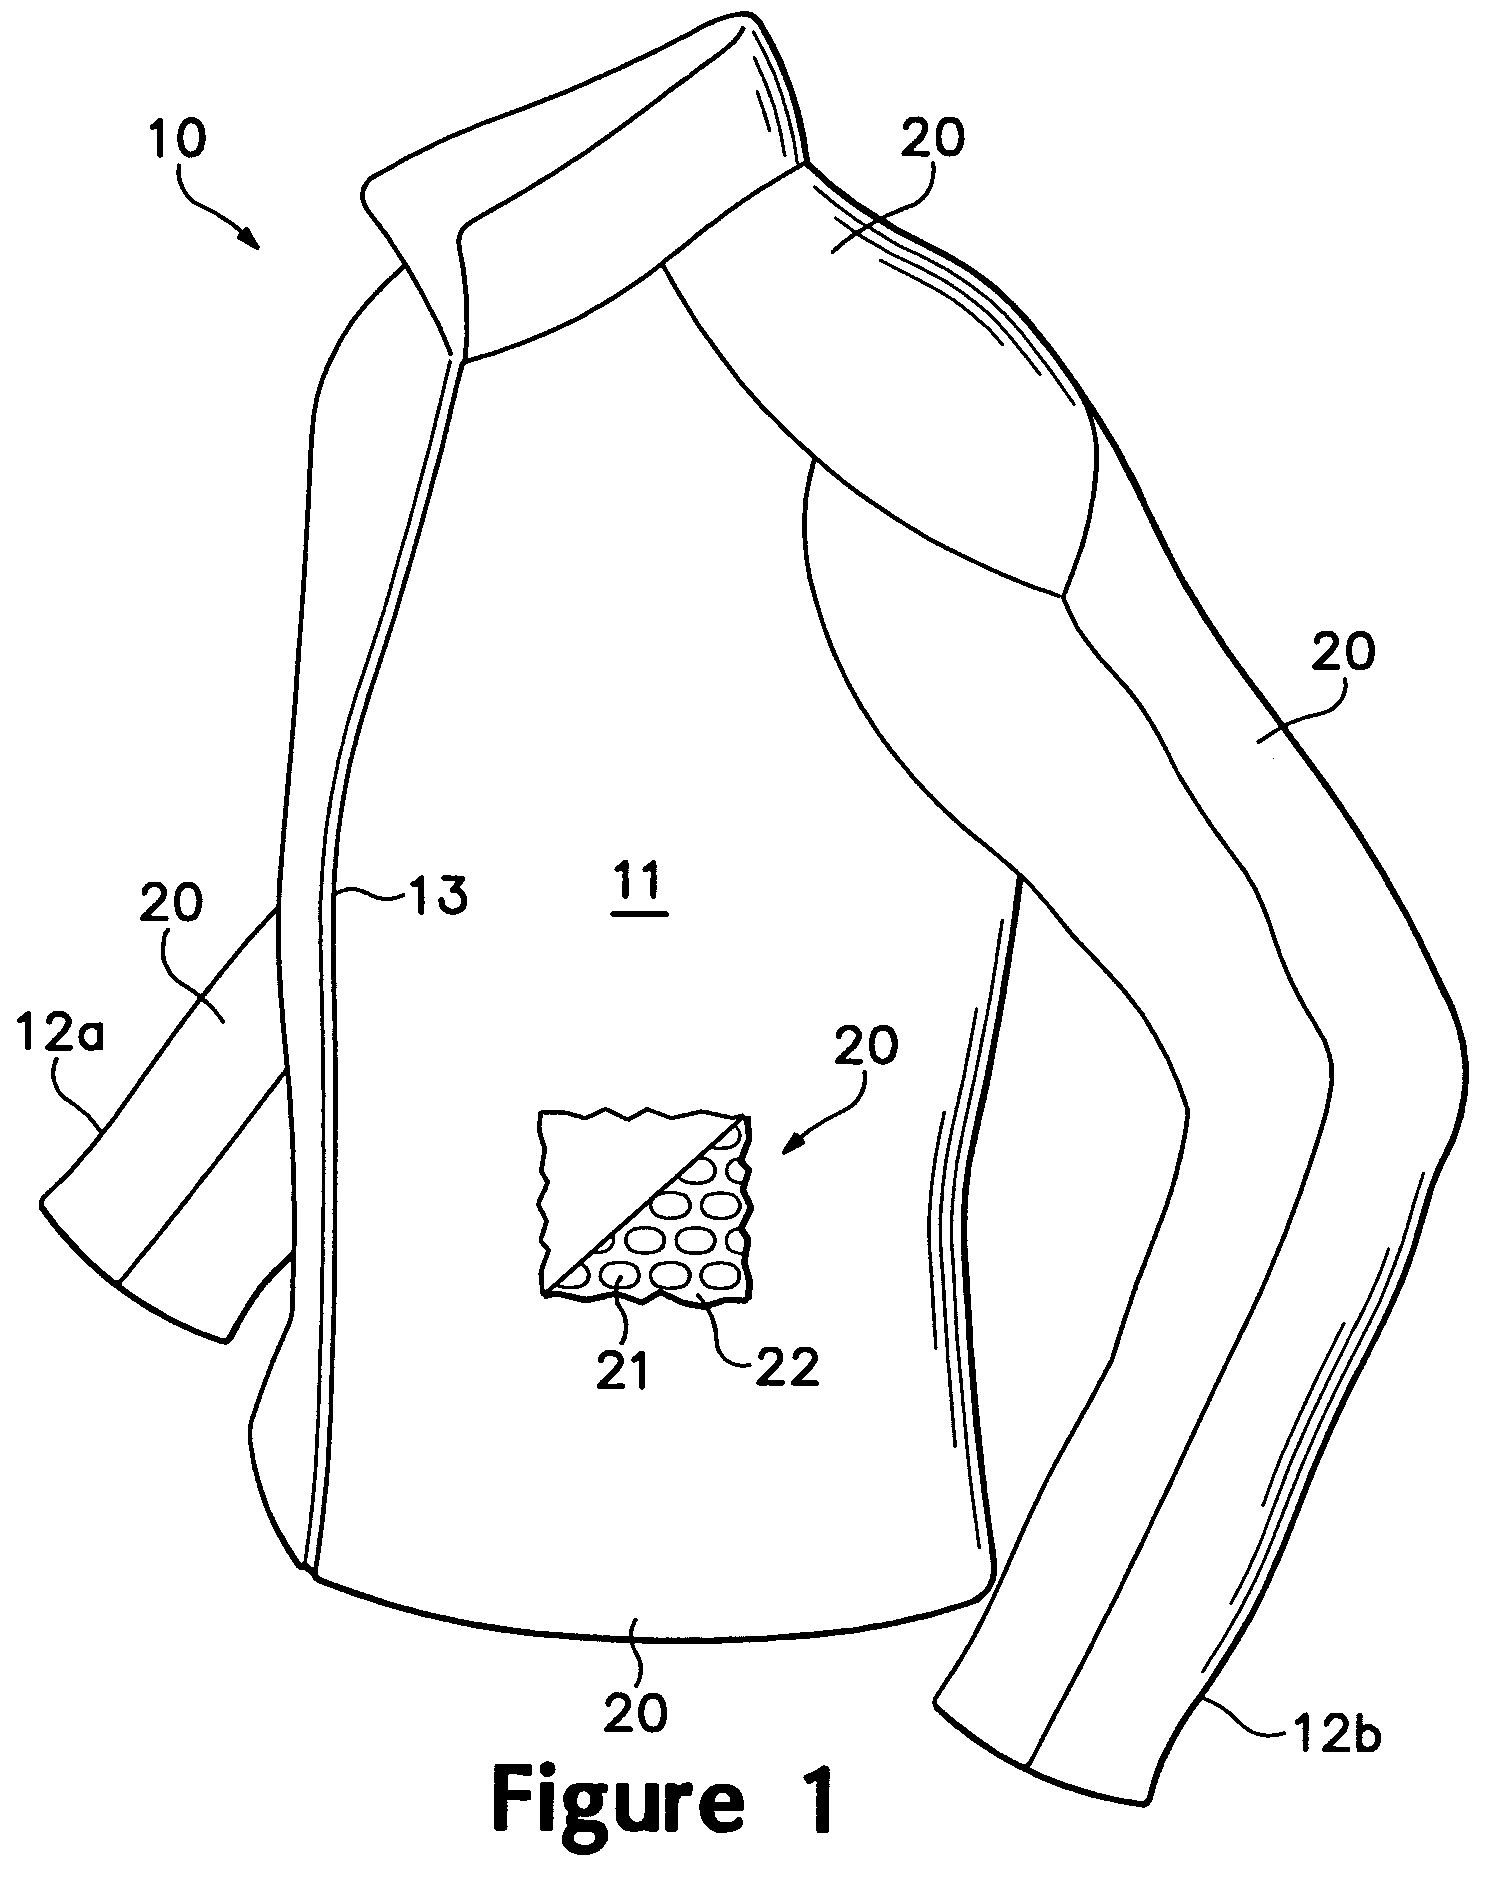 Article of apparel incorporating an embossed material